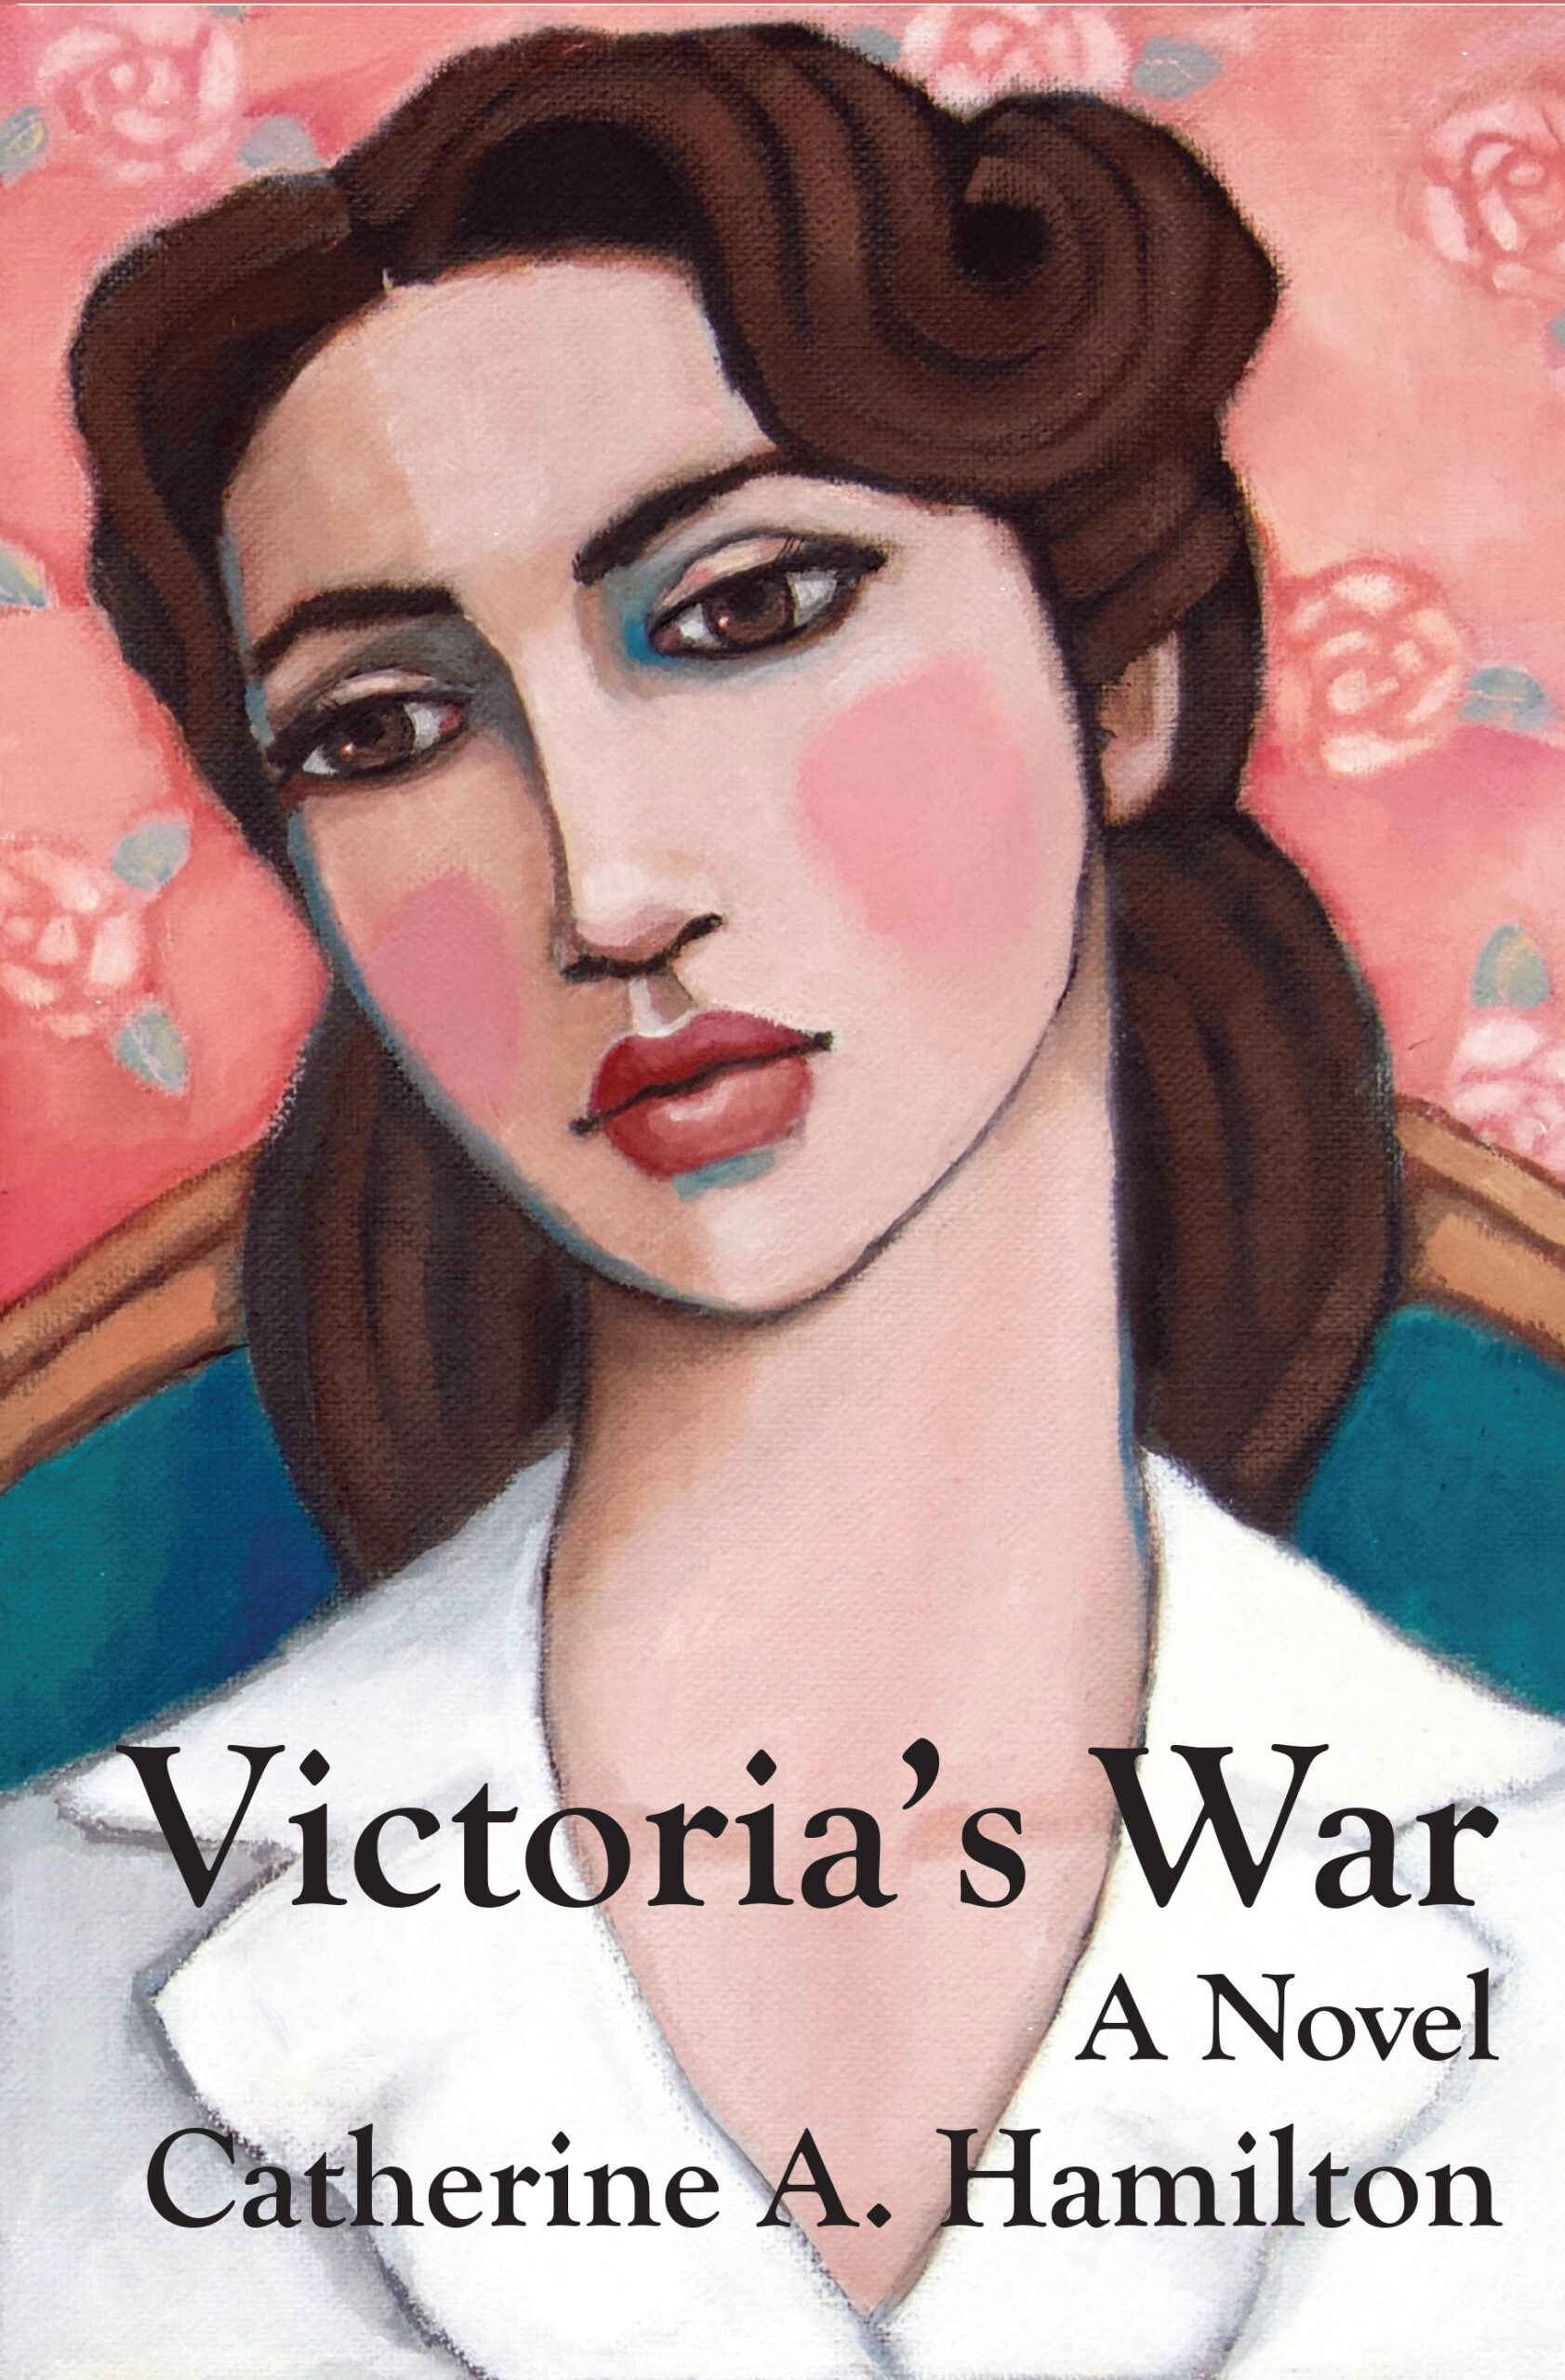 Victoria’s War by Catherine A. Hamilton Unveils Polish Slavery by Nazis in WWII